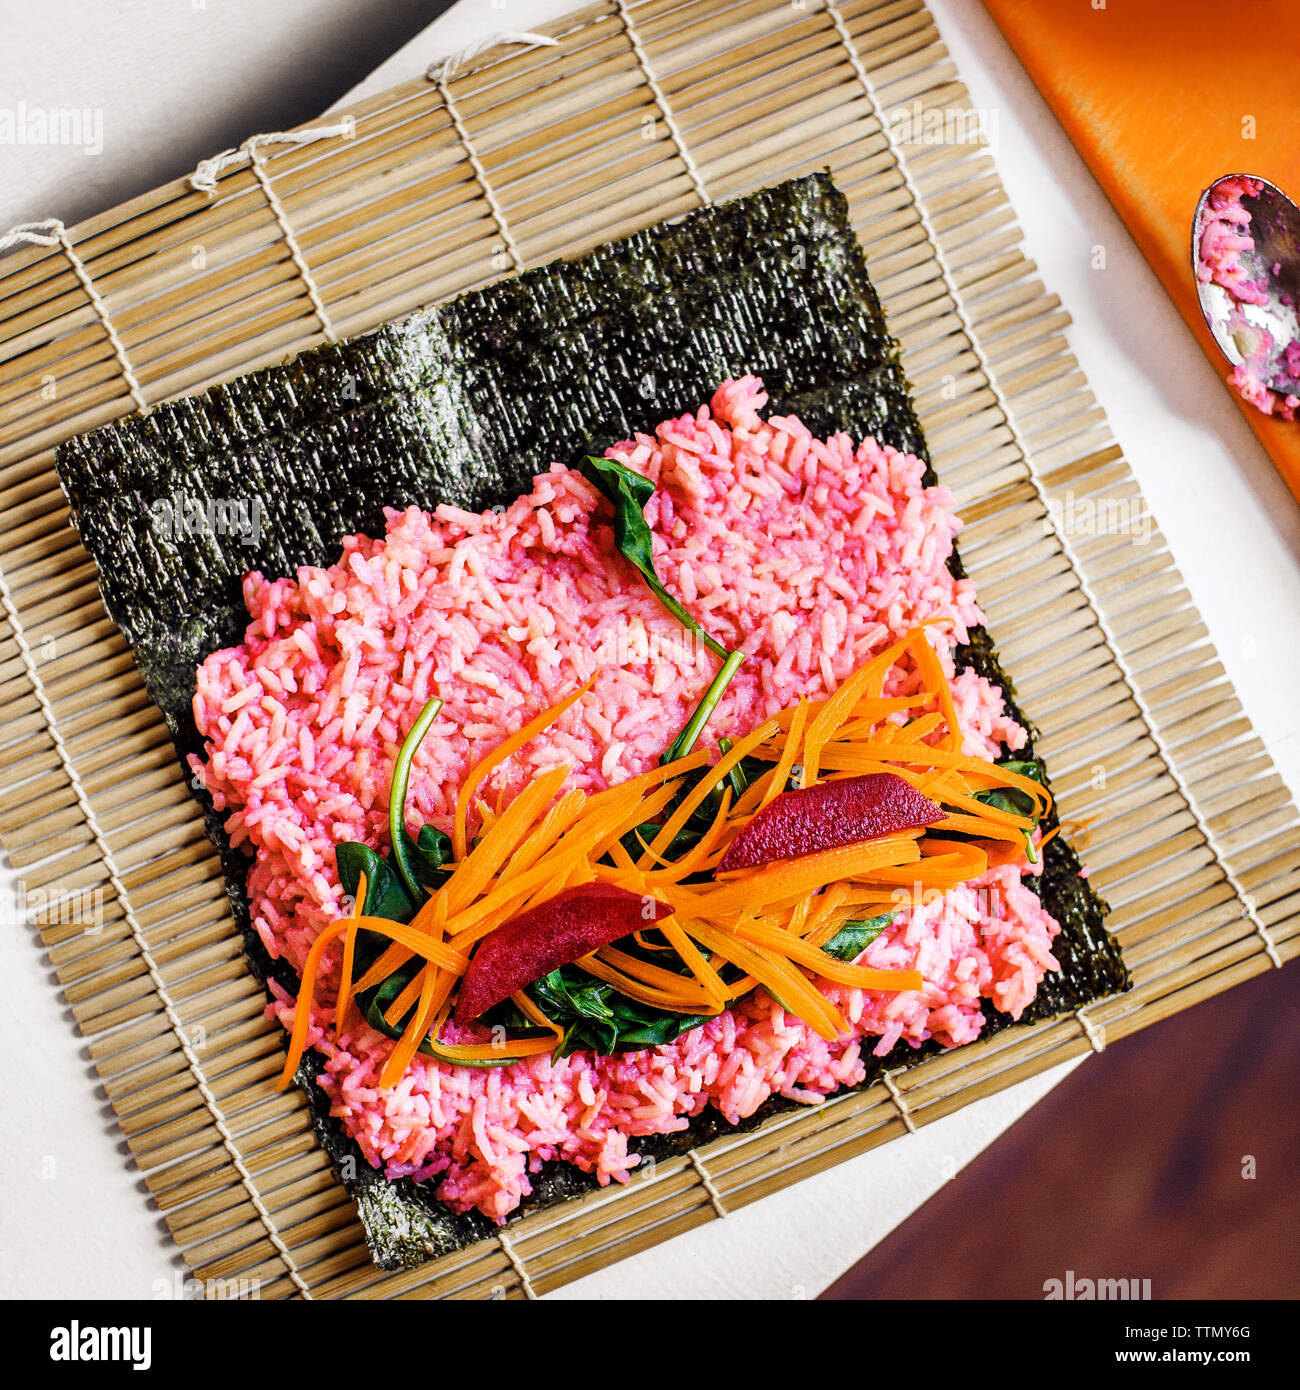 Overhead view of vegetables and sushi rice on nori at table Stock Photo